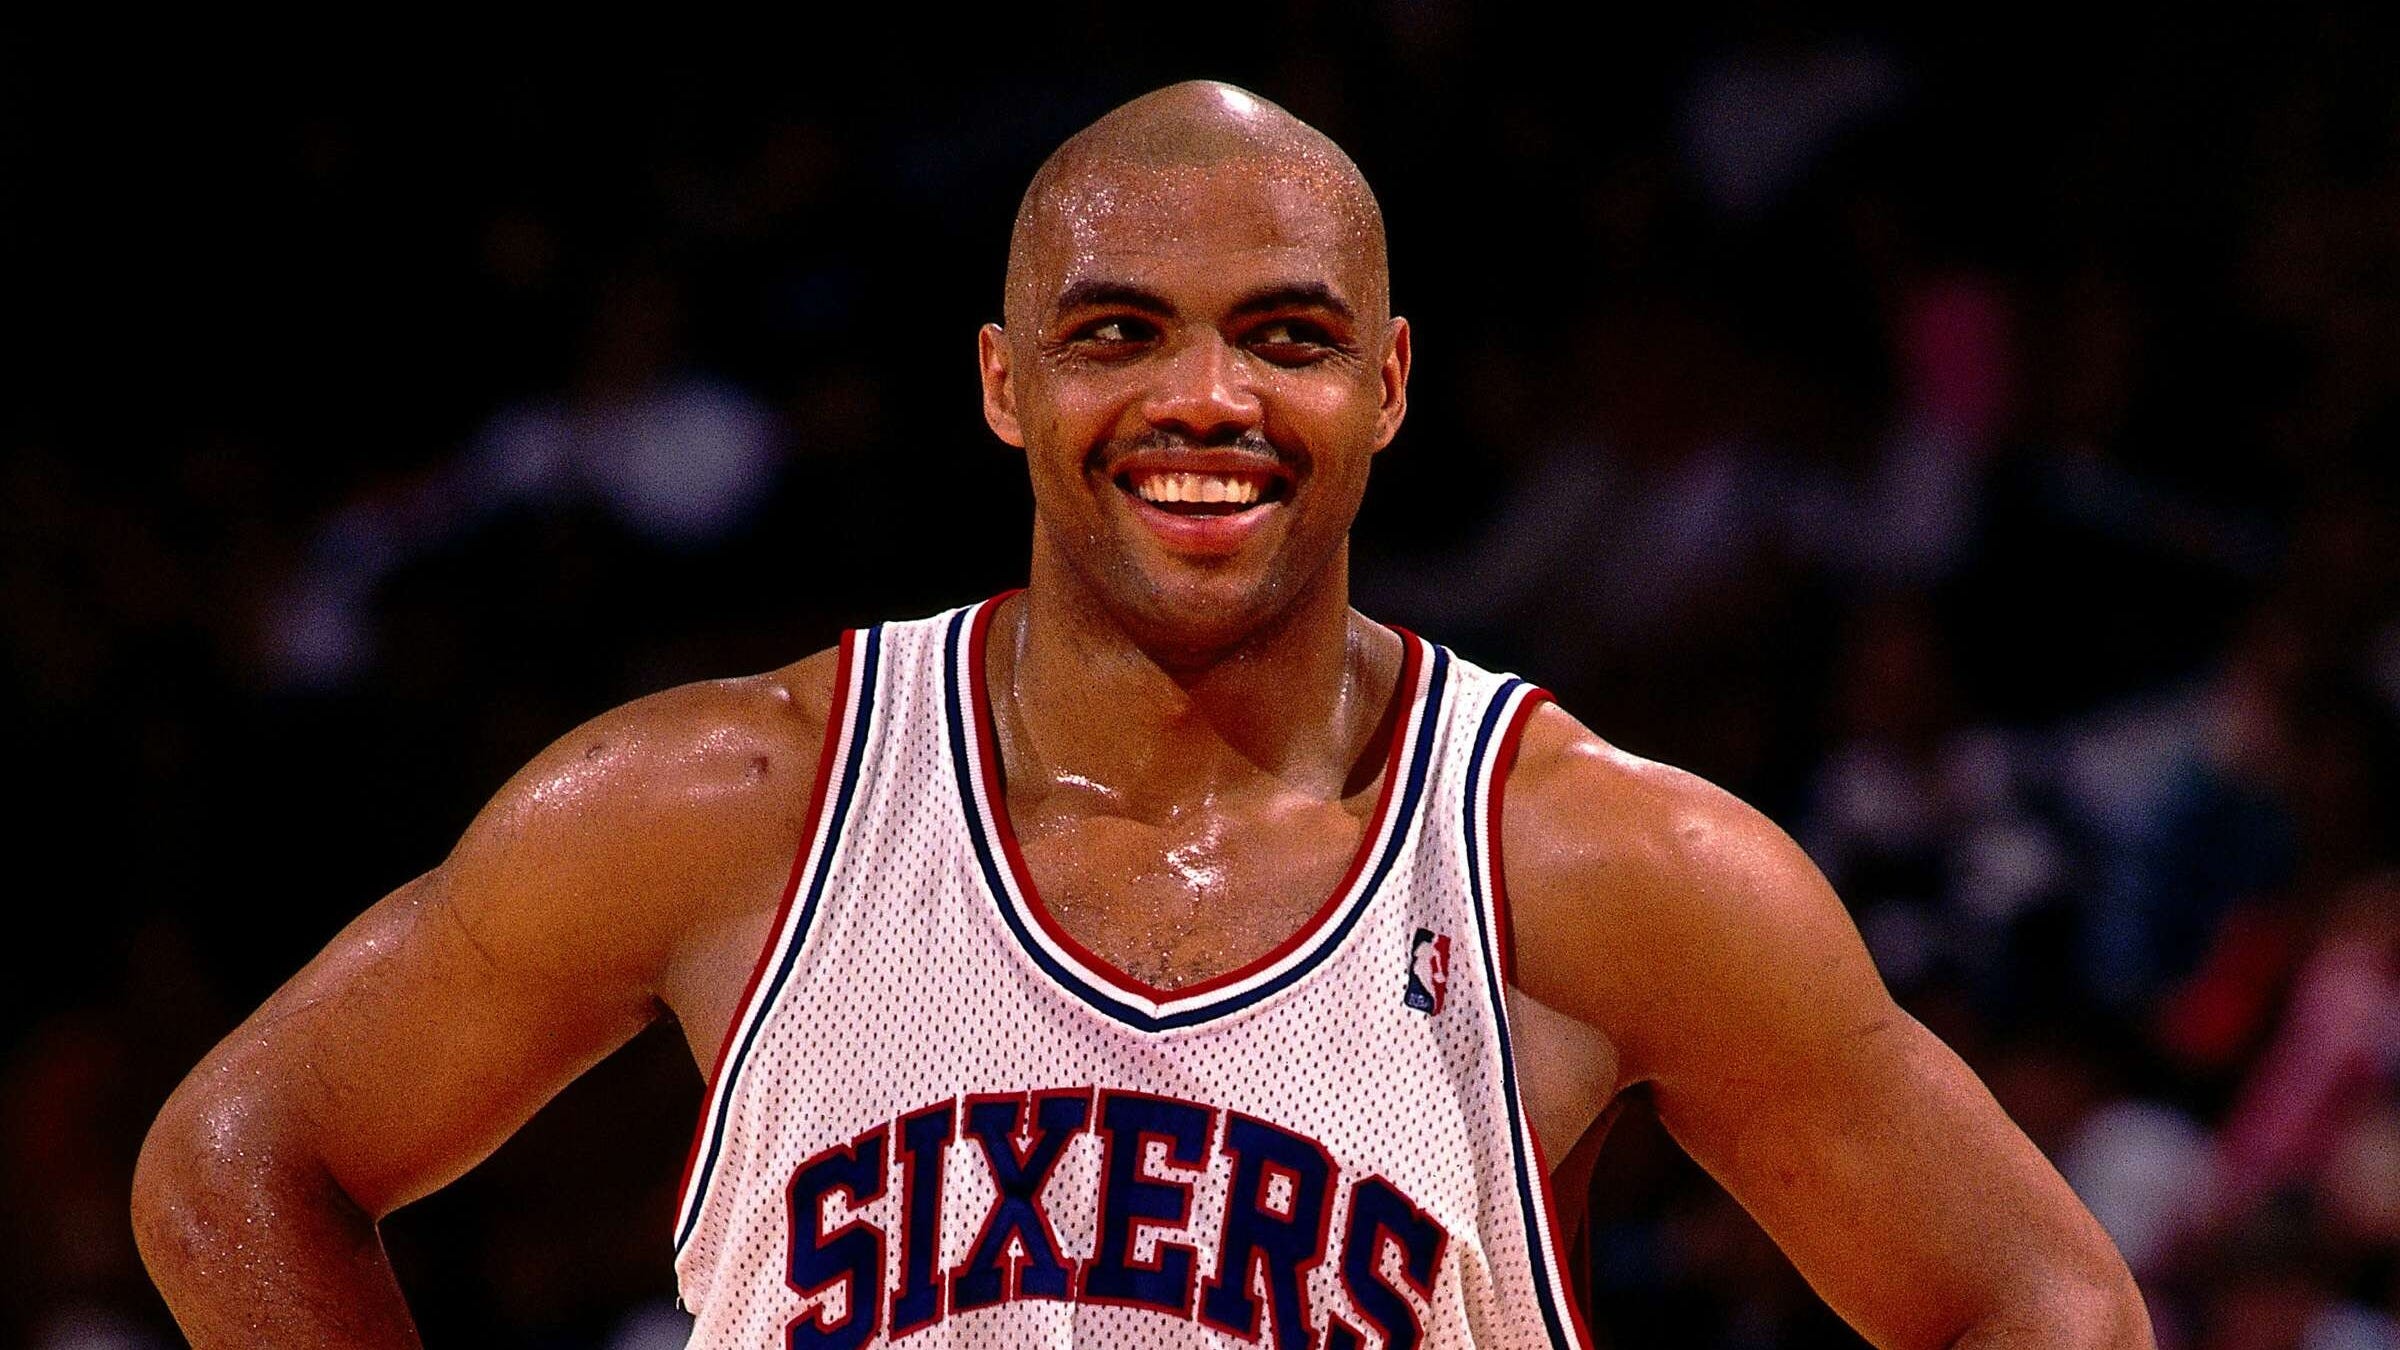 Charles Barkley, Biography, Stats, Height, Teams, & Facts